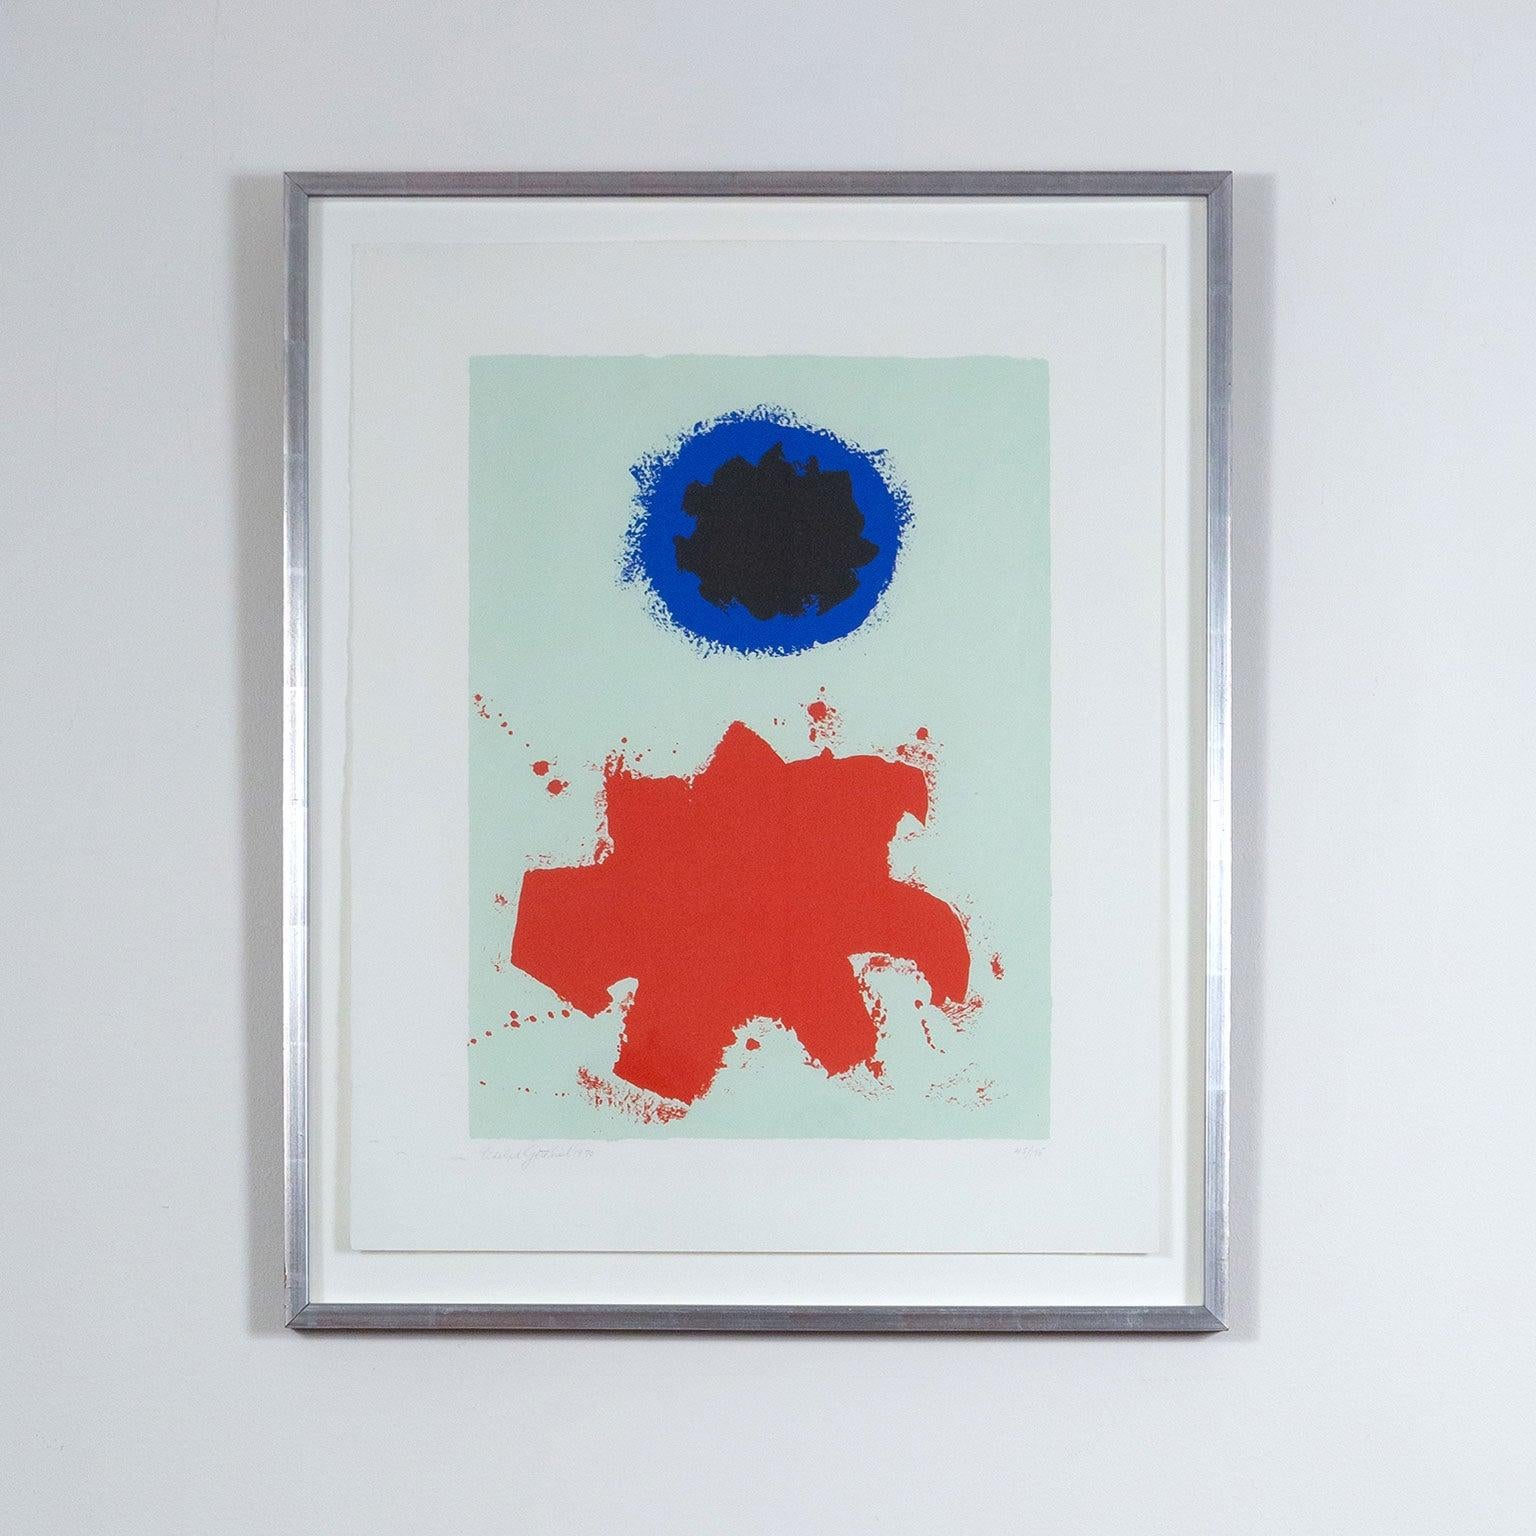 Untitled (from the Peace Portfolio I) - Print by Adolph Gottlieb